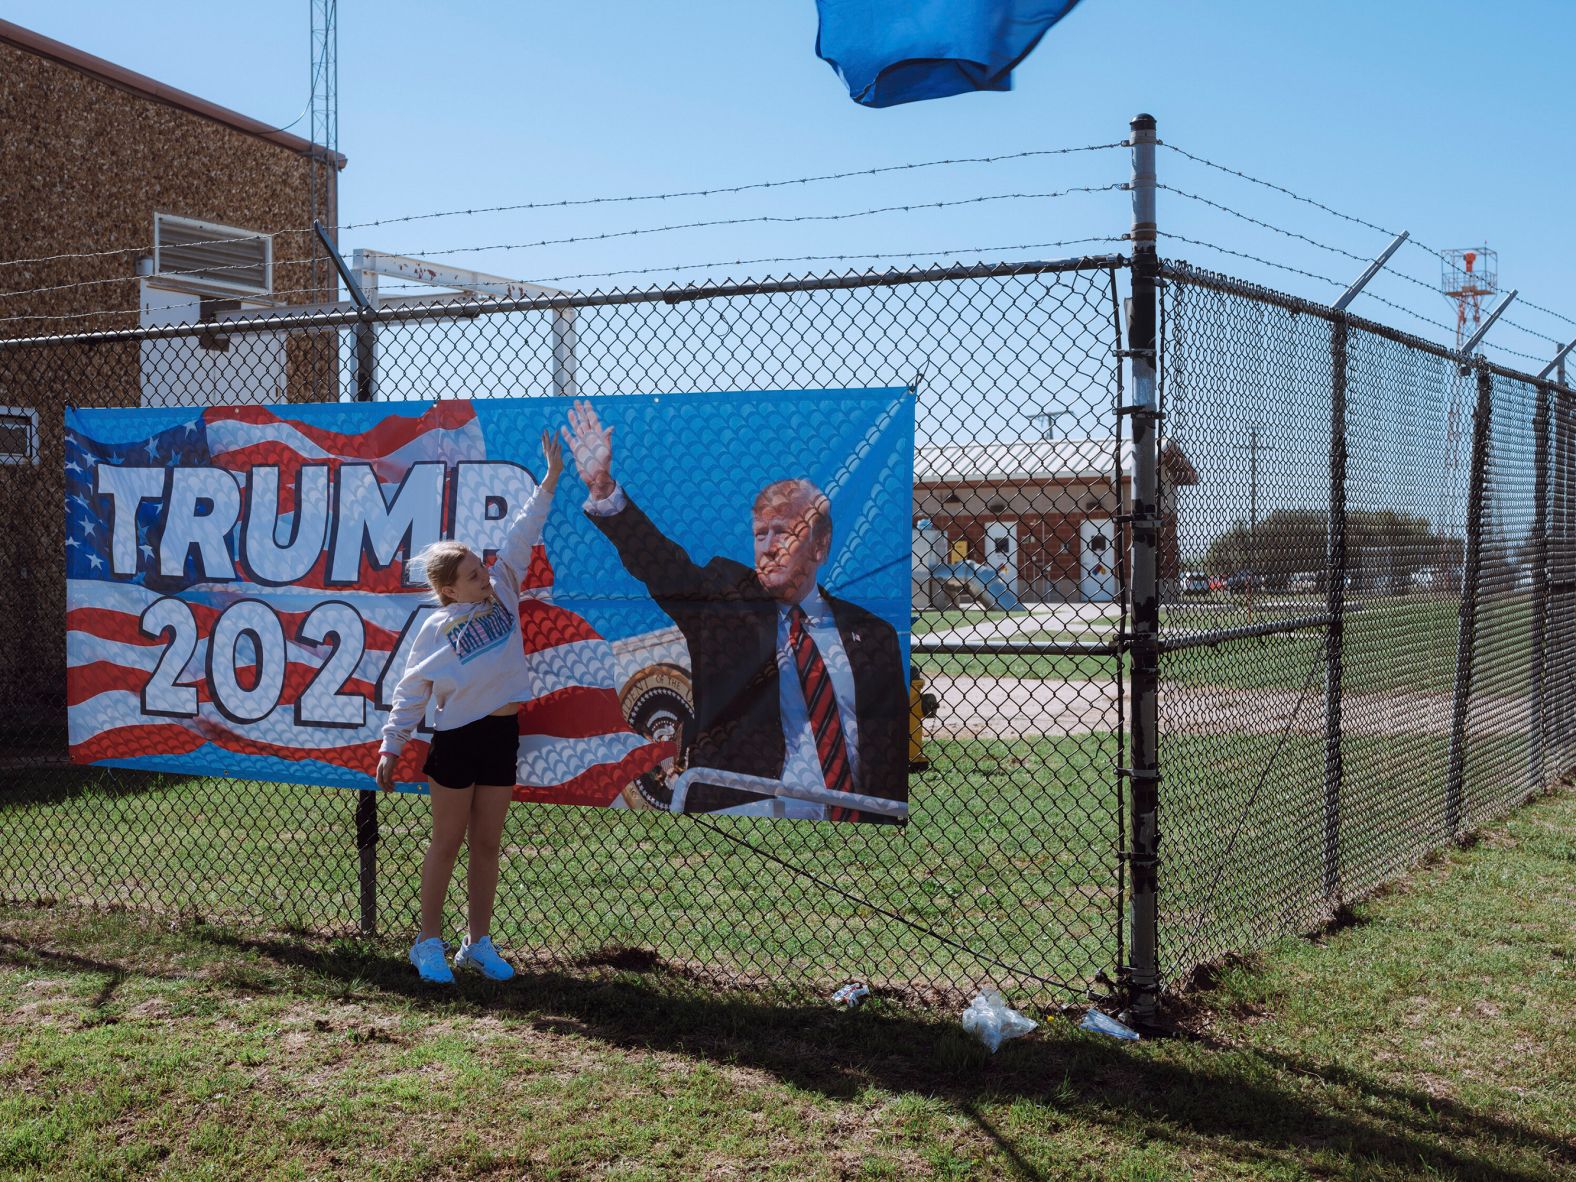 A supporter high-fives a poster at the site of Trump's rally in Waco on March 25.